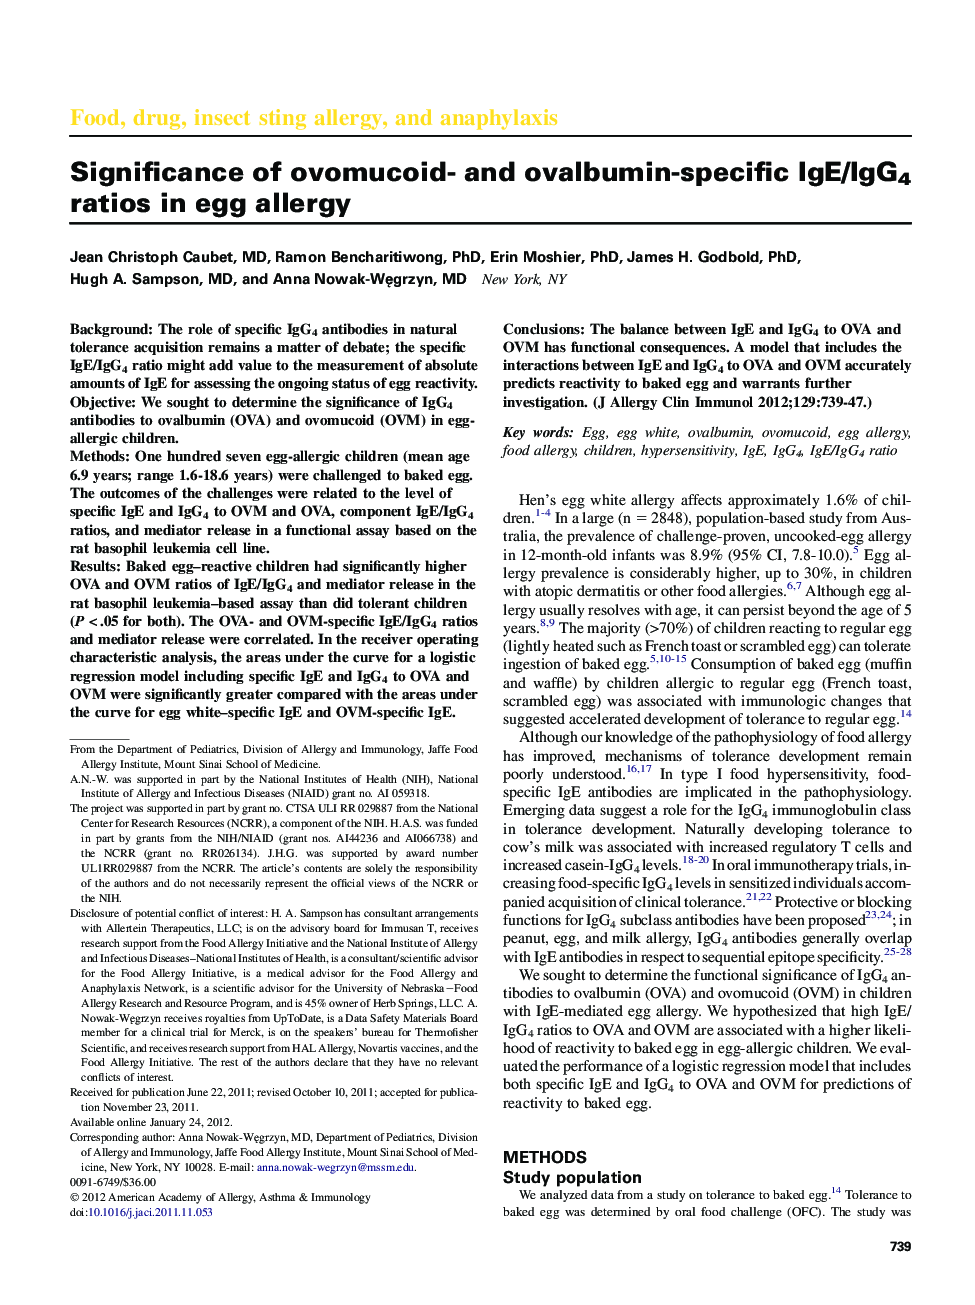 Significance of ovomucoid- and ovalbumin-specific IgE/IgG4 ratios in egg allergy 